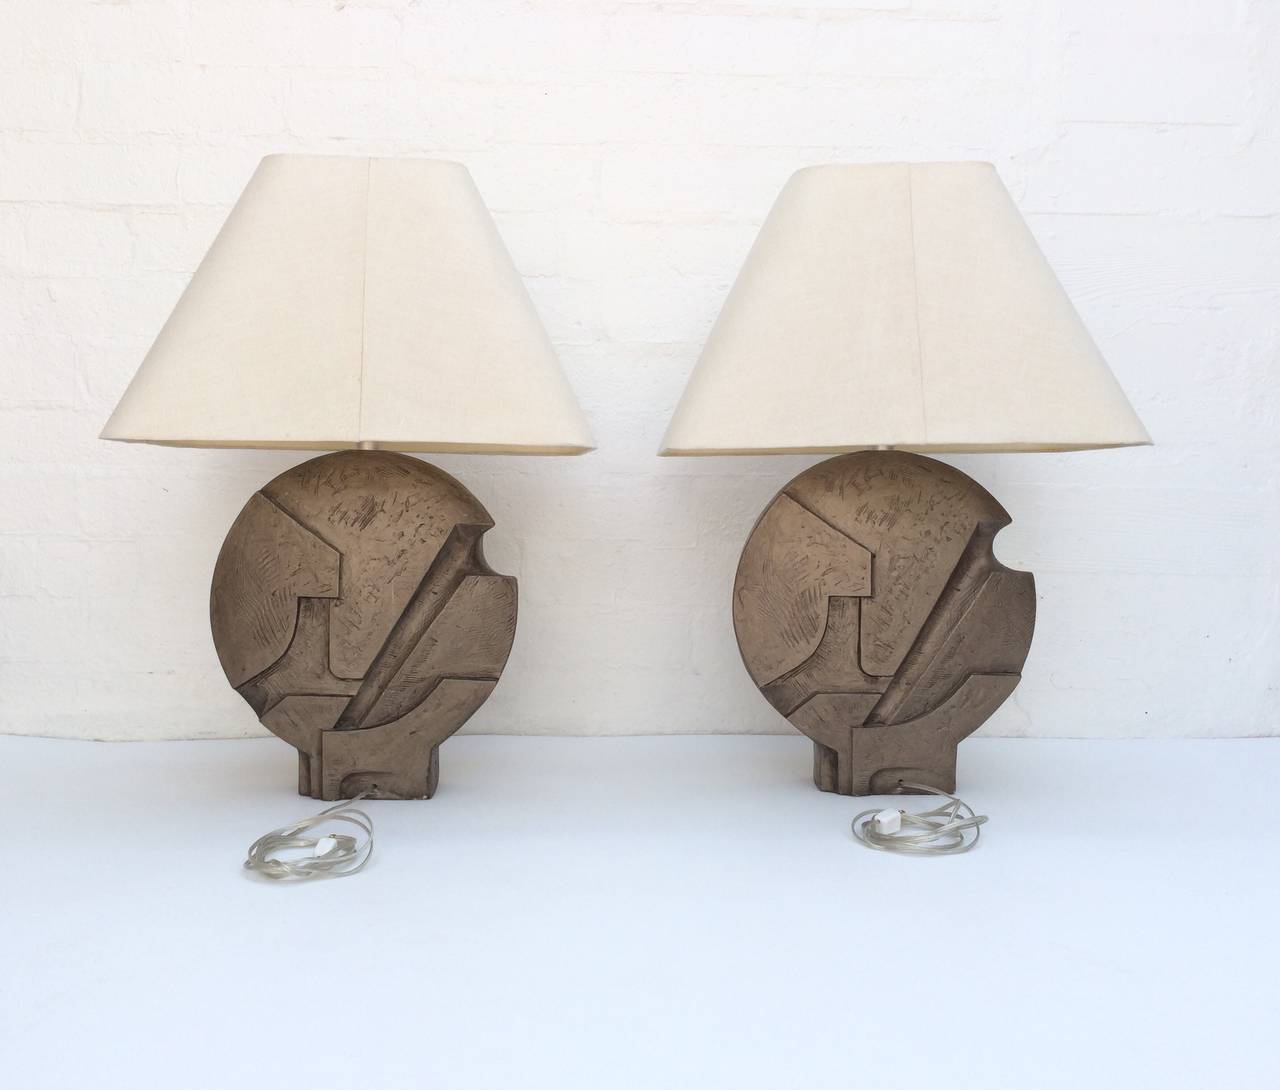 A pair of painted plaster sculpture tables lamps.
These attractive lamps are from the 1960s and are painted with a bronze finish.
Newly rewired and all new nickel hardware.